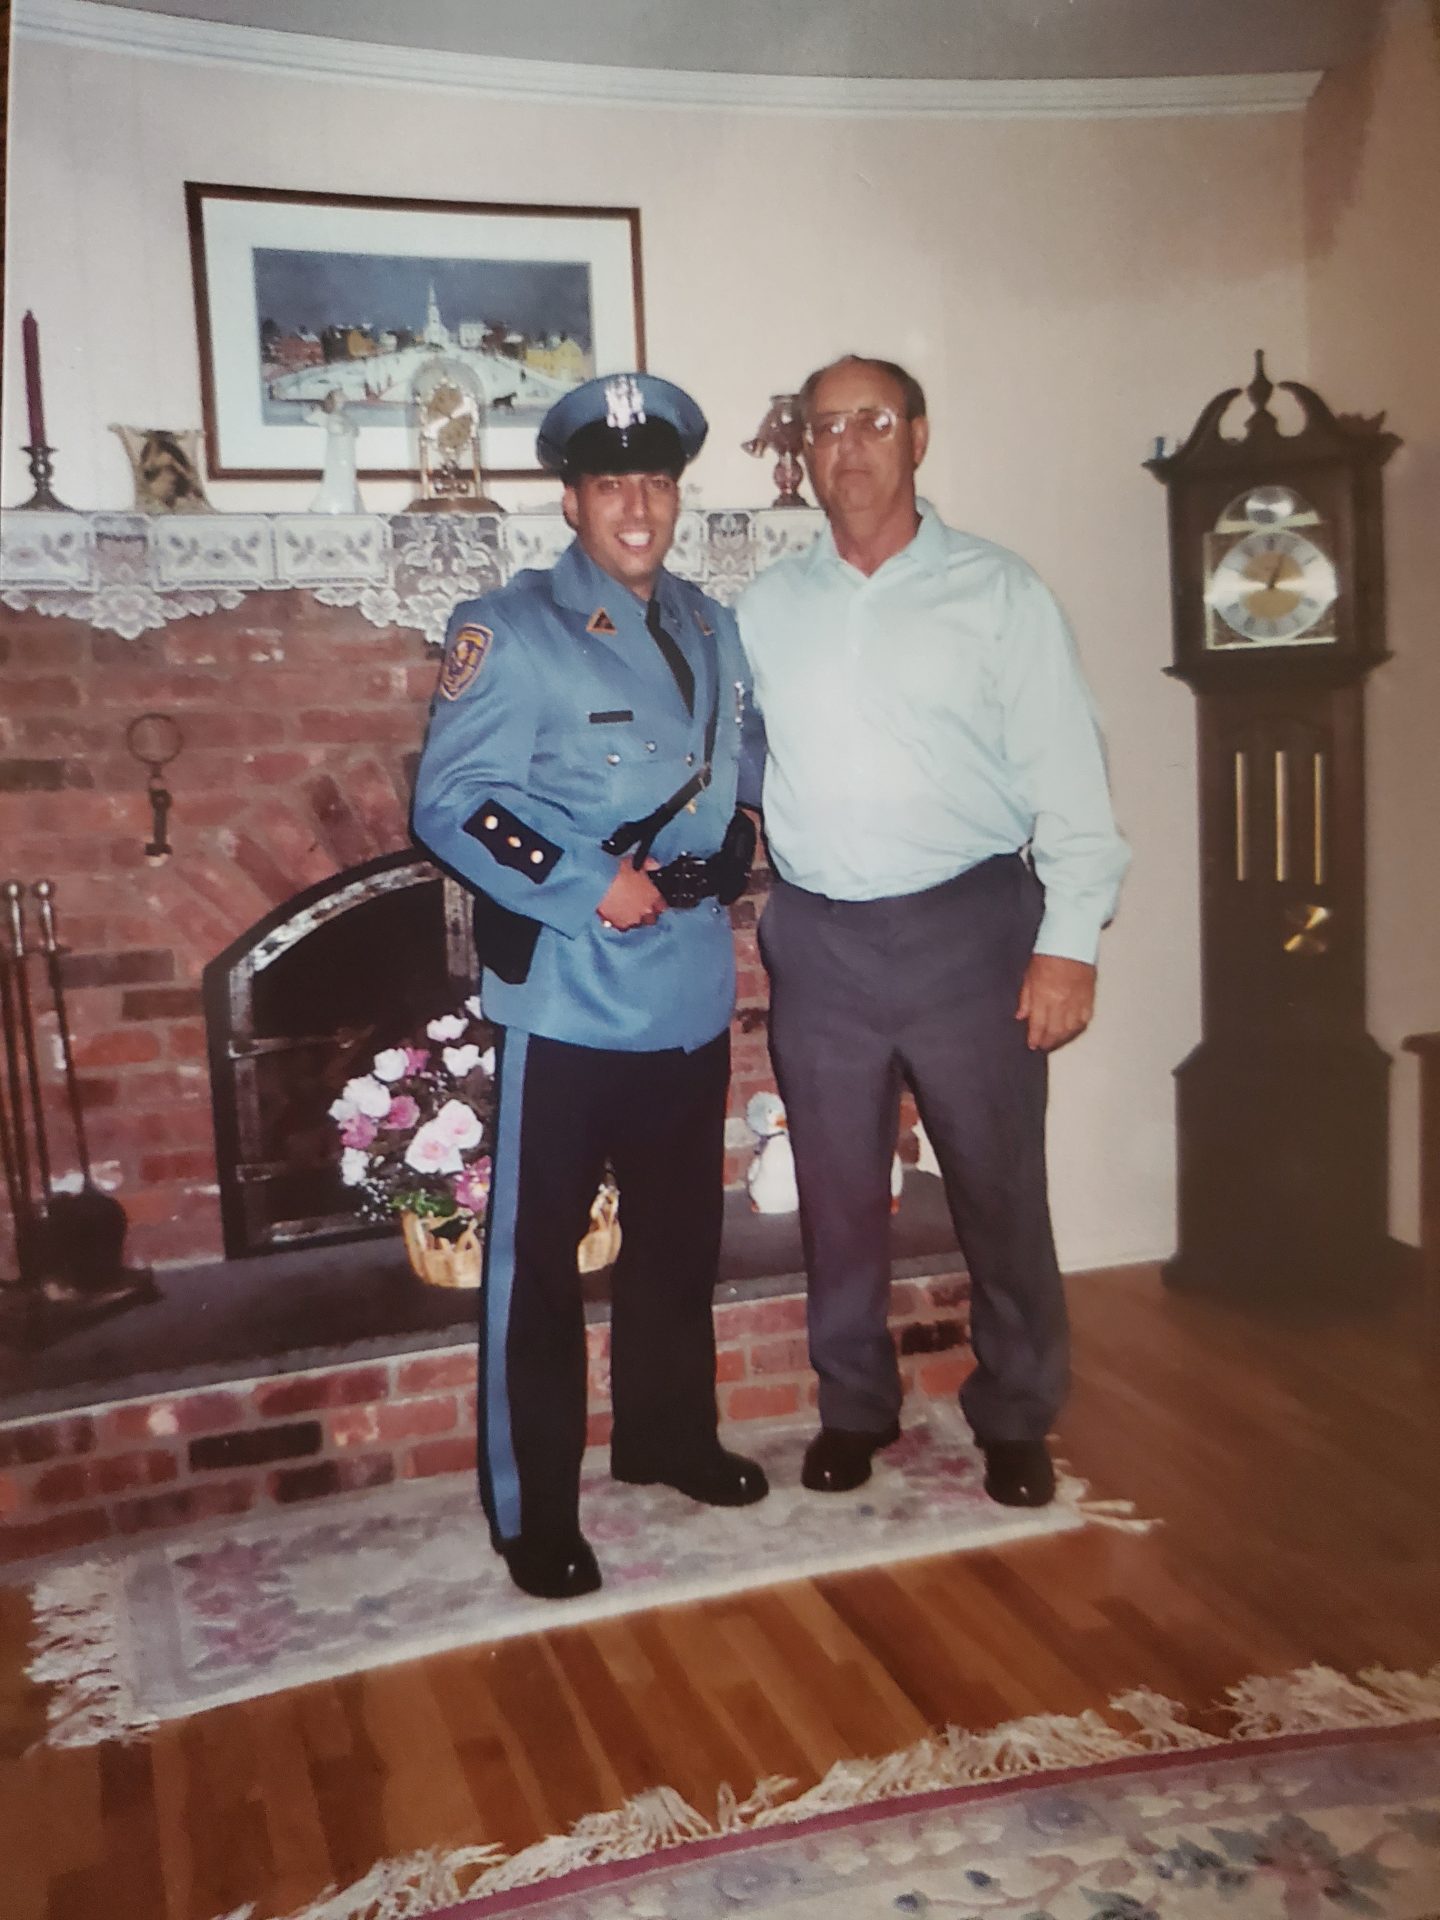 Me and my Godfather after I graduated from the police academy.